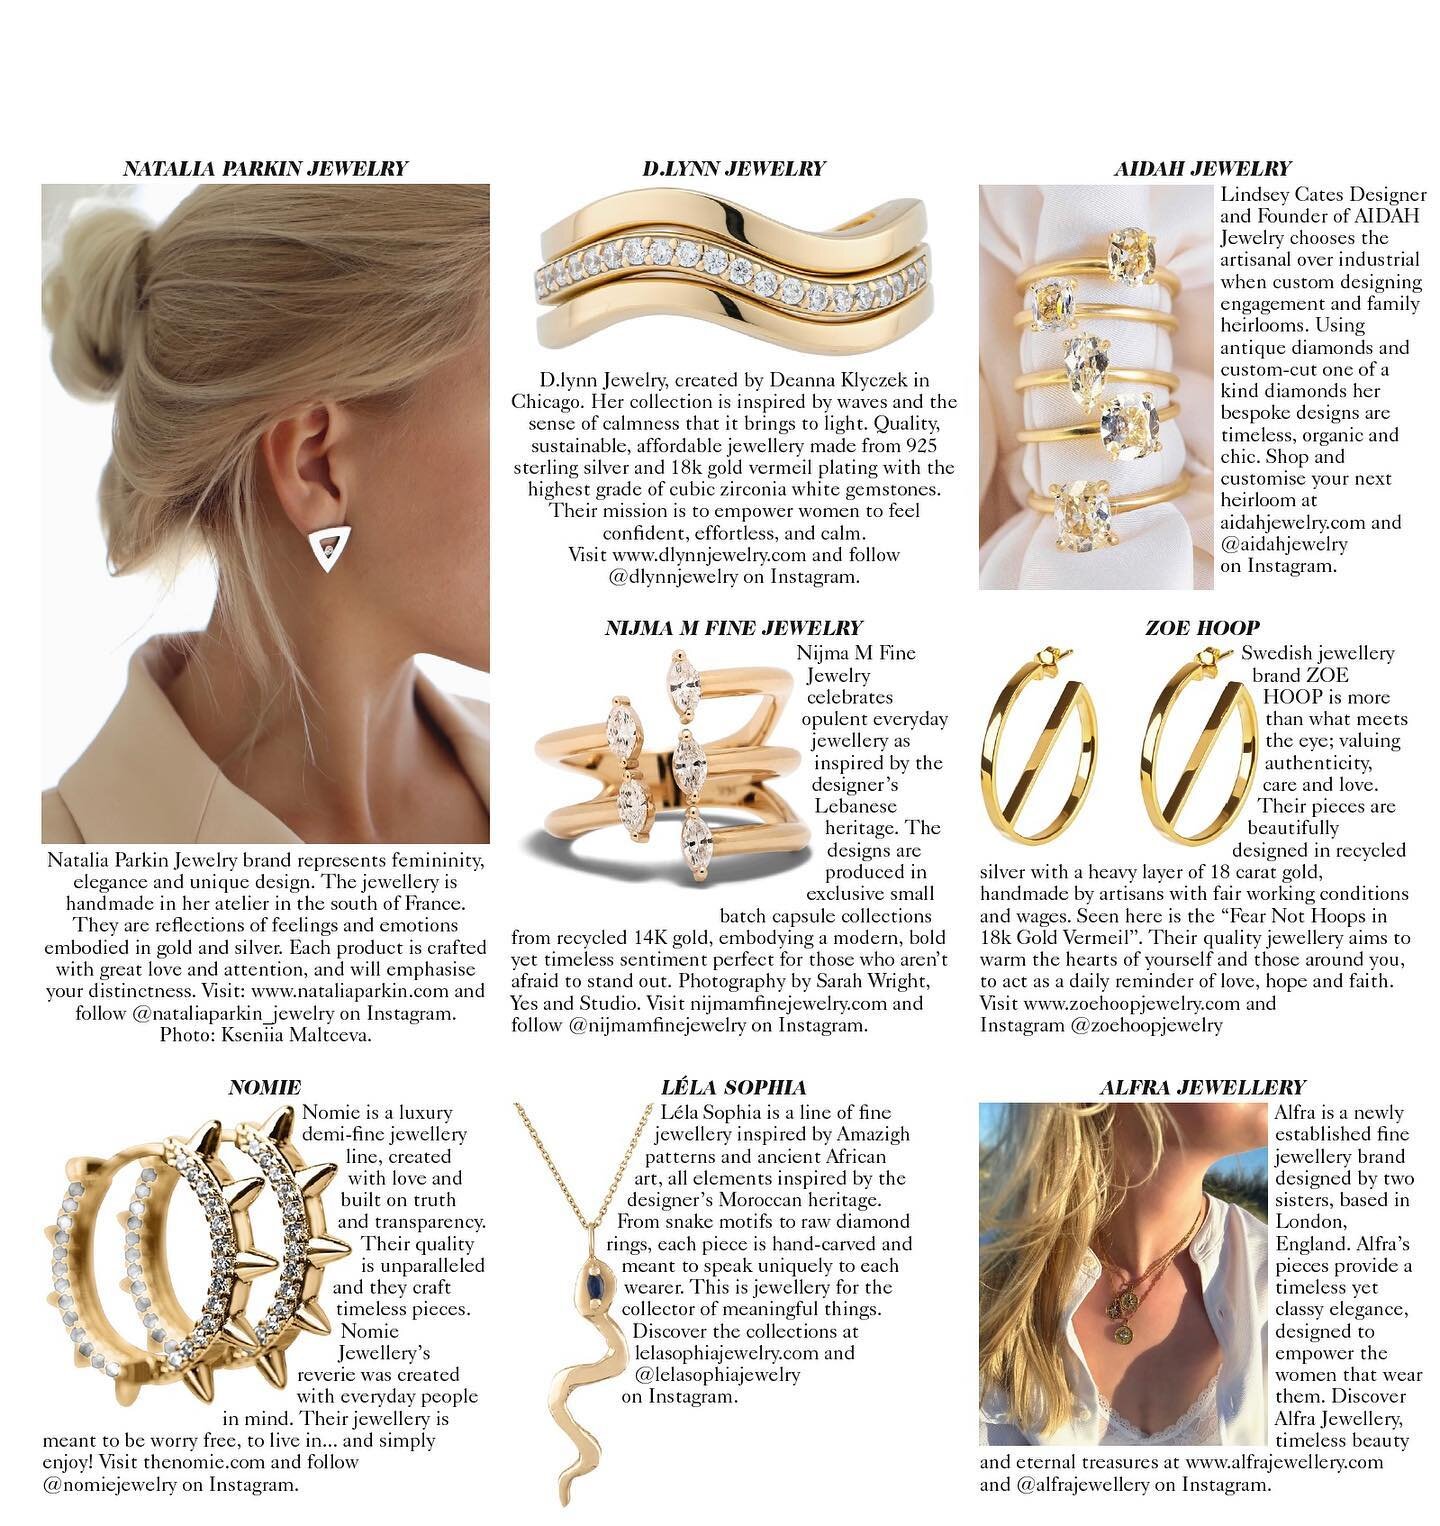 Featured in the &ldquo;Jewellery Designer Profile&rdquo; in the new May issue of @britishvogue 🤍 So grateful to be apart of this along with other amazing designers.

Thank you @britishvogue @condenast 🤍